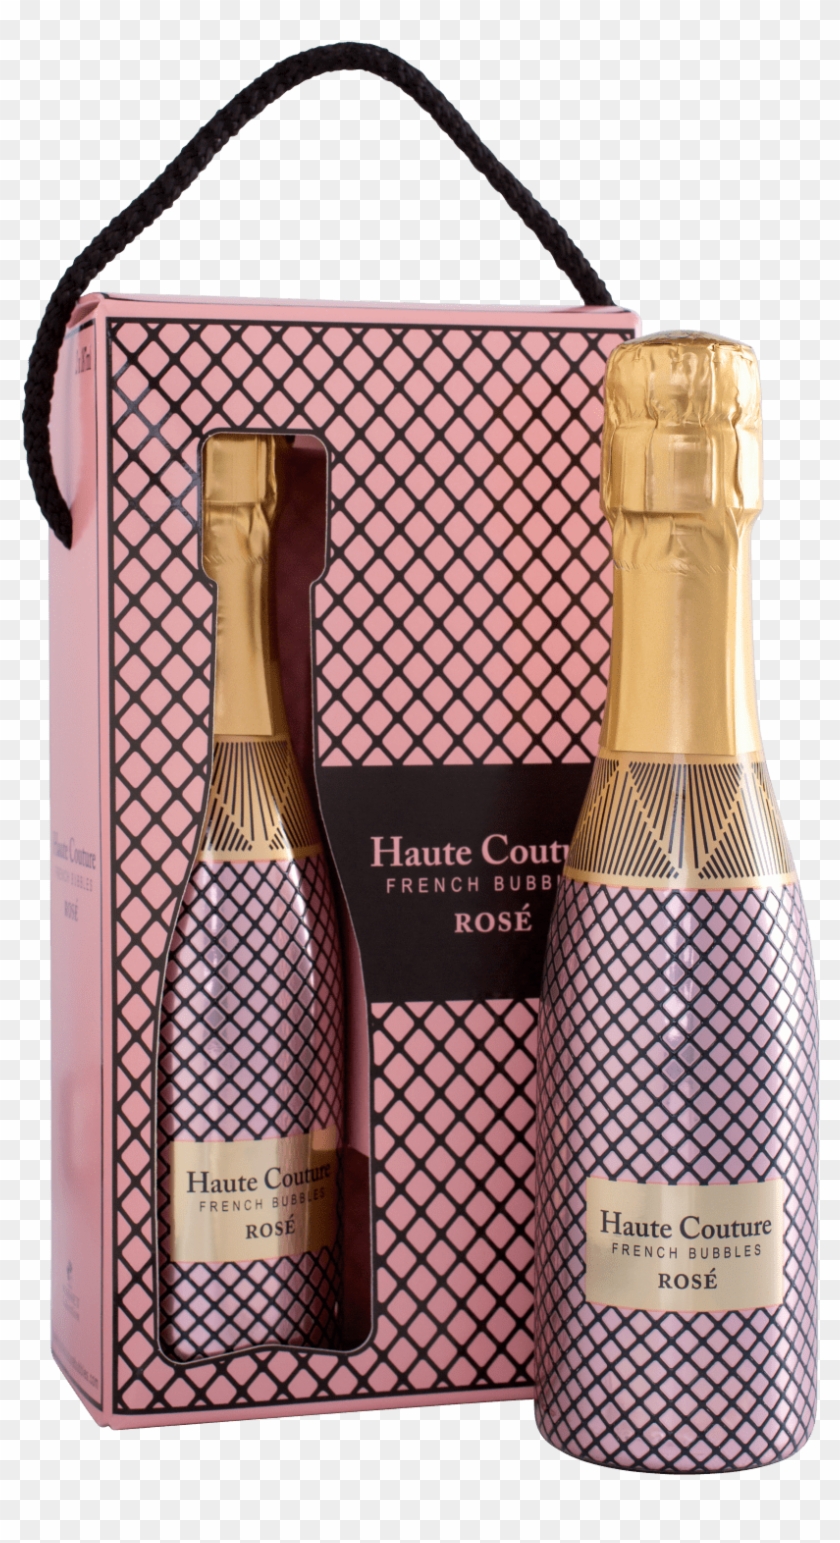 Our Friends At Boisset Are Out With Two New Sparkling - Haute Couture French Bubbles Rose Clipart #2038946